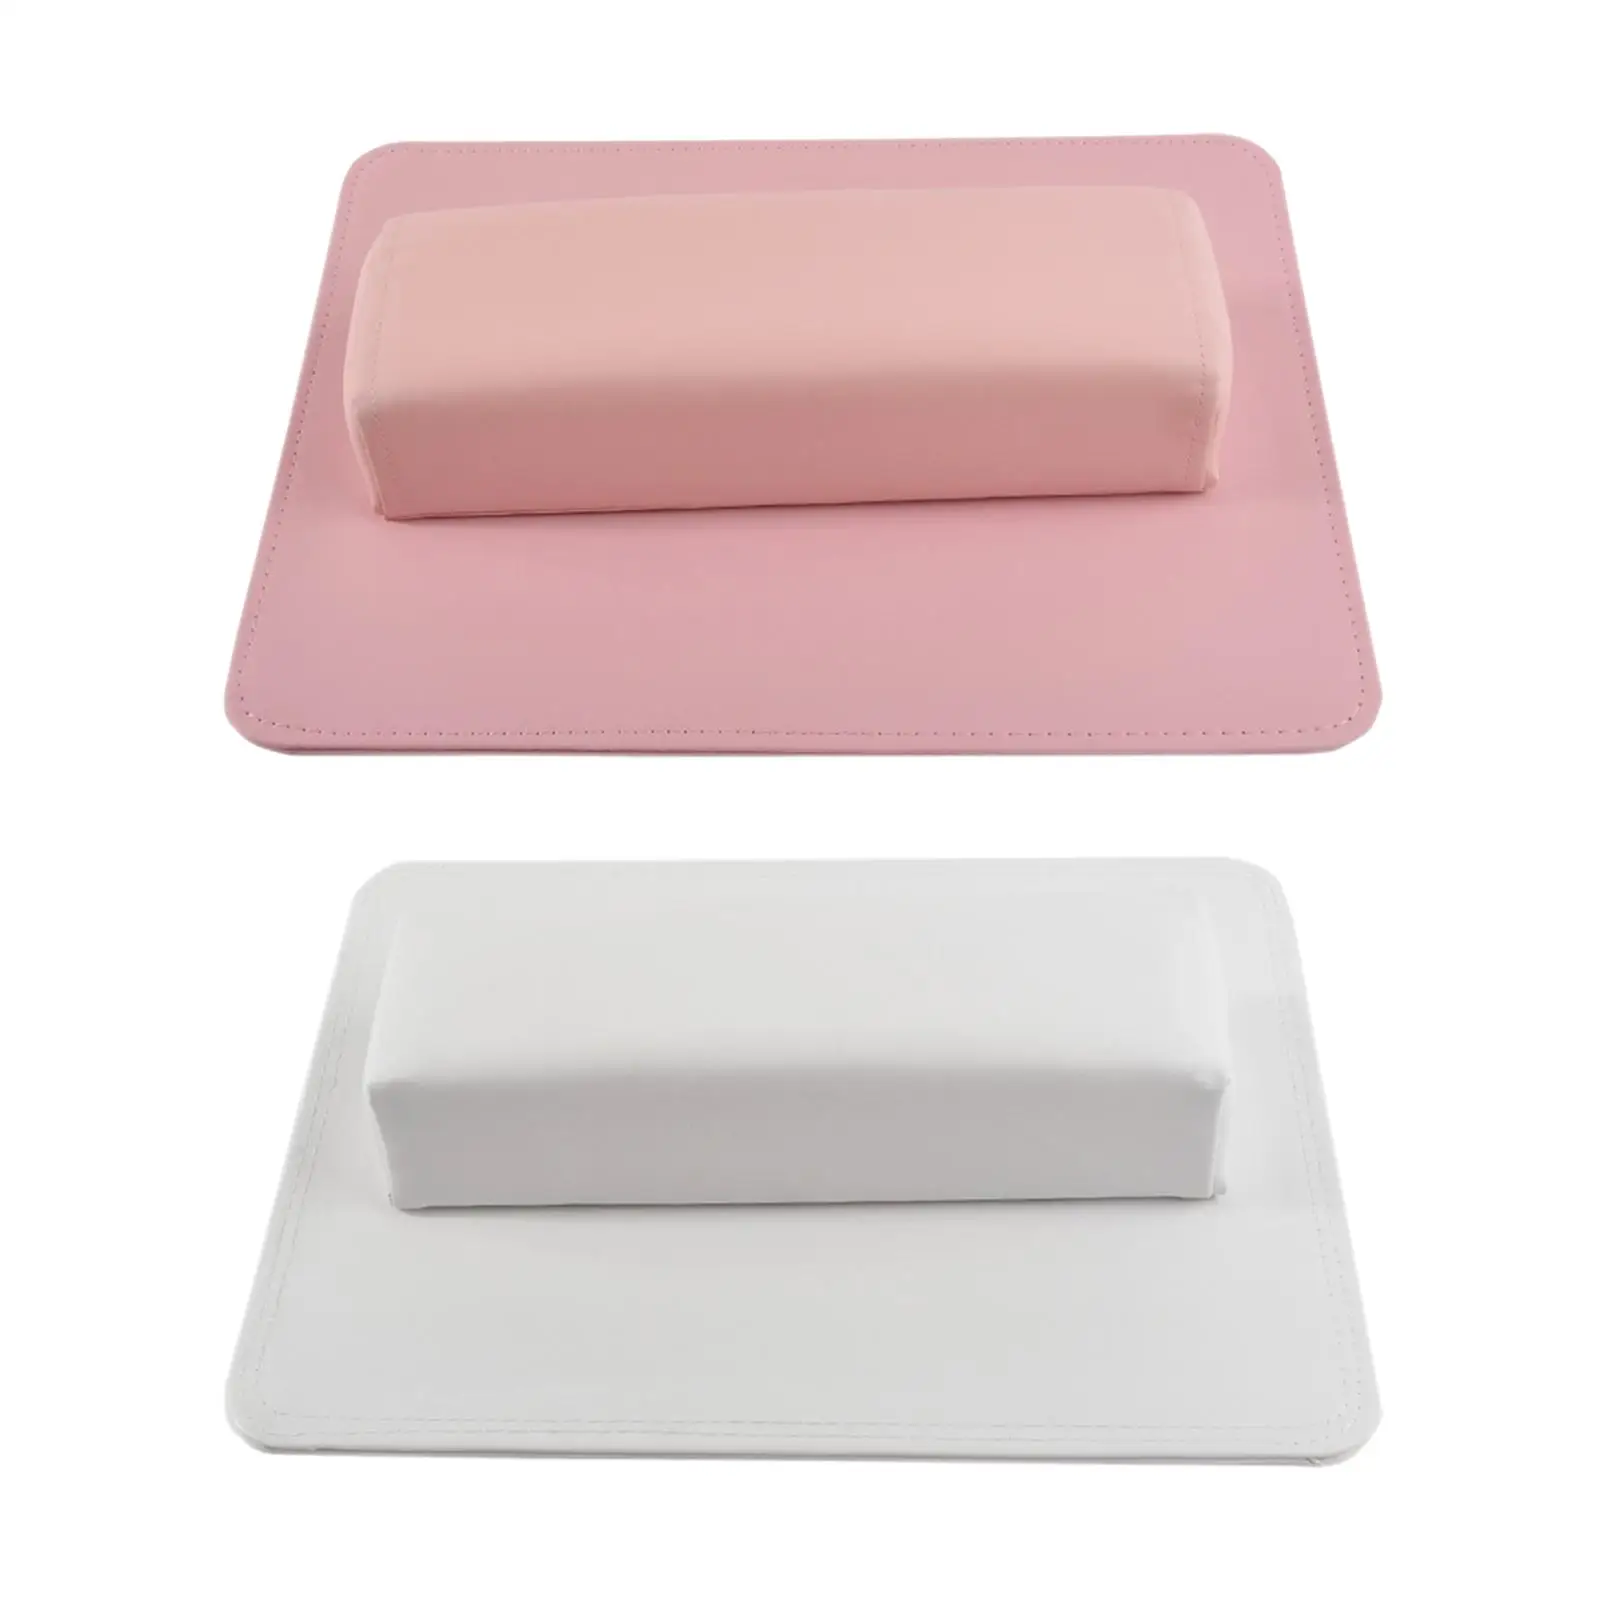 Nail Hand Pillow and Mat Set PU Leather Nail Art Cushion Mat Set Nail Hand Rest Cushion Hand Cushion for Home Salon Manicurist